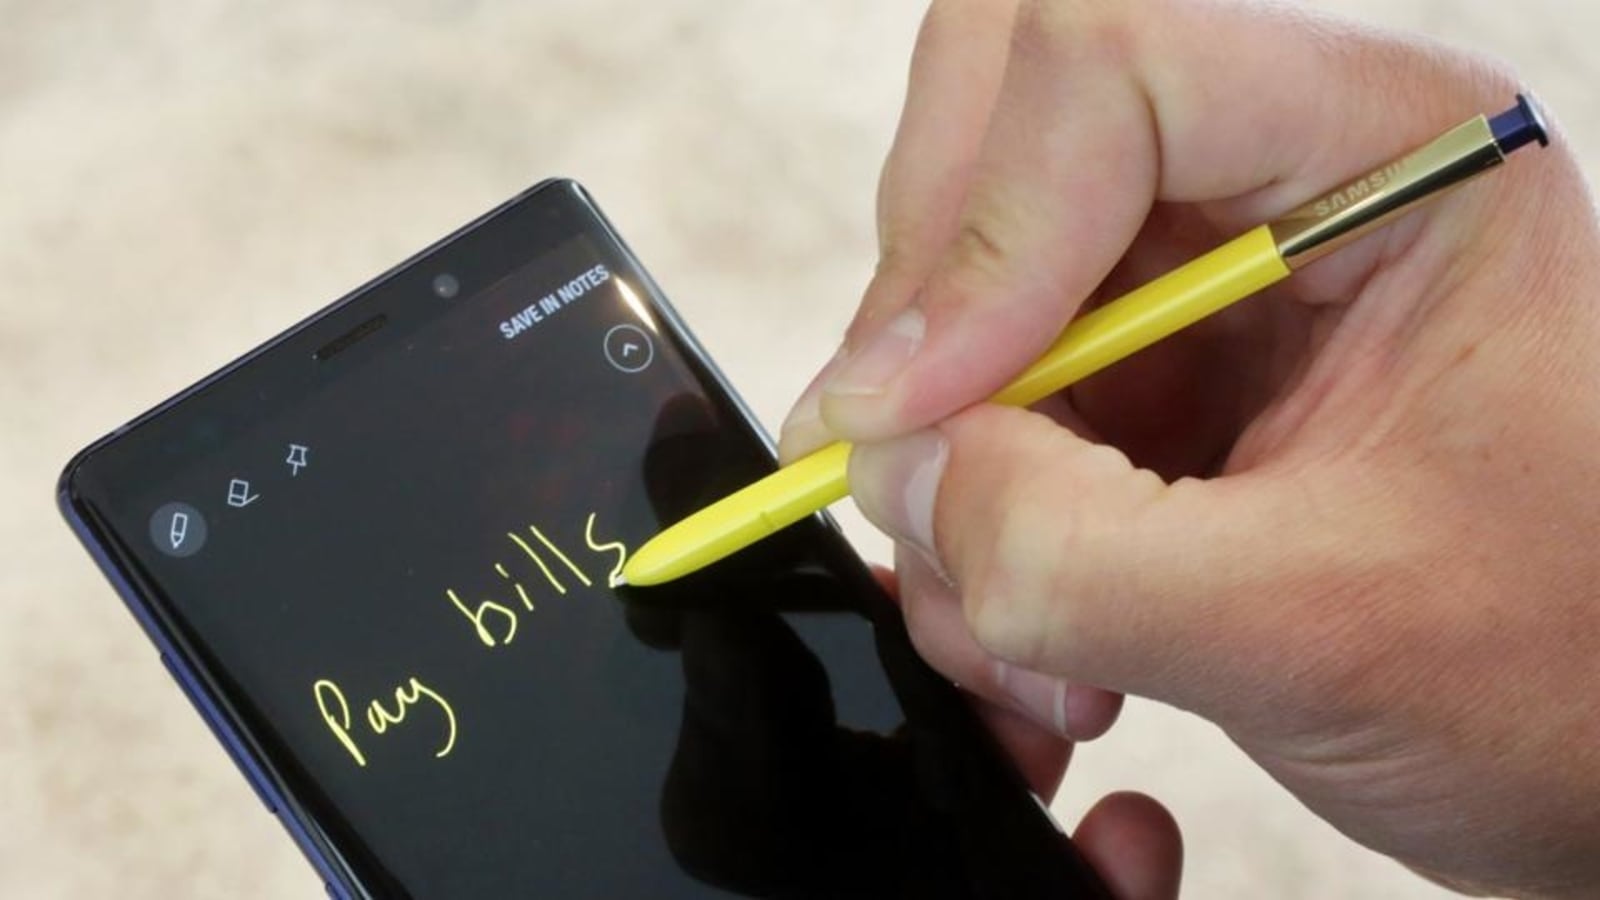 Samsung Galaxy Note 10 Lite review: Get it for the S Pen - SamMobile